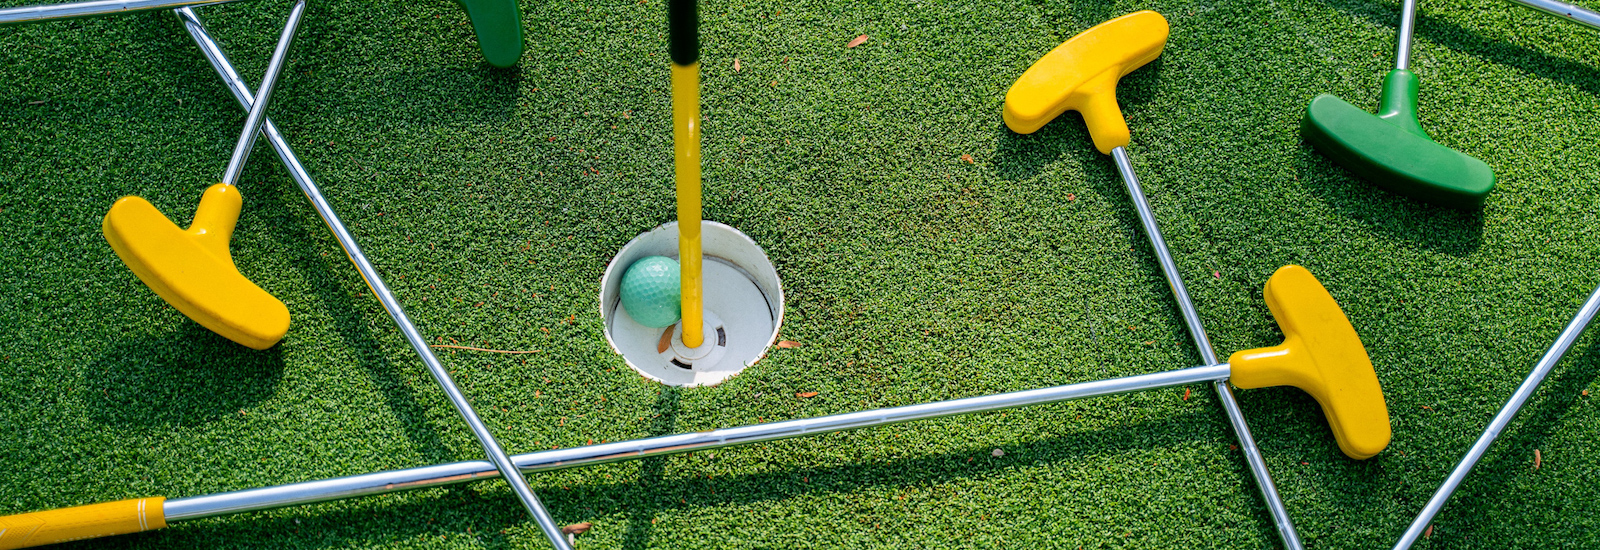 Stock image of mini golf clubs, a ball and course hole.